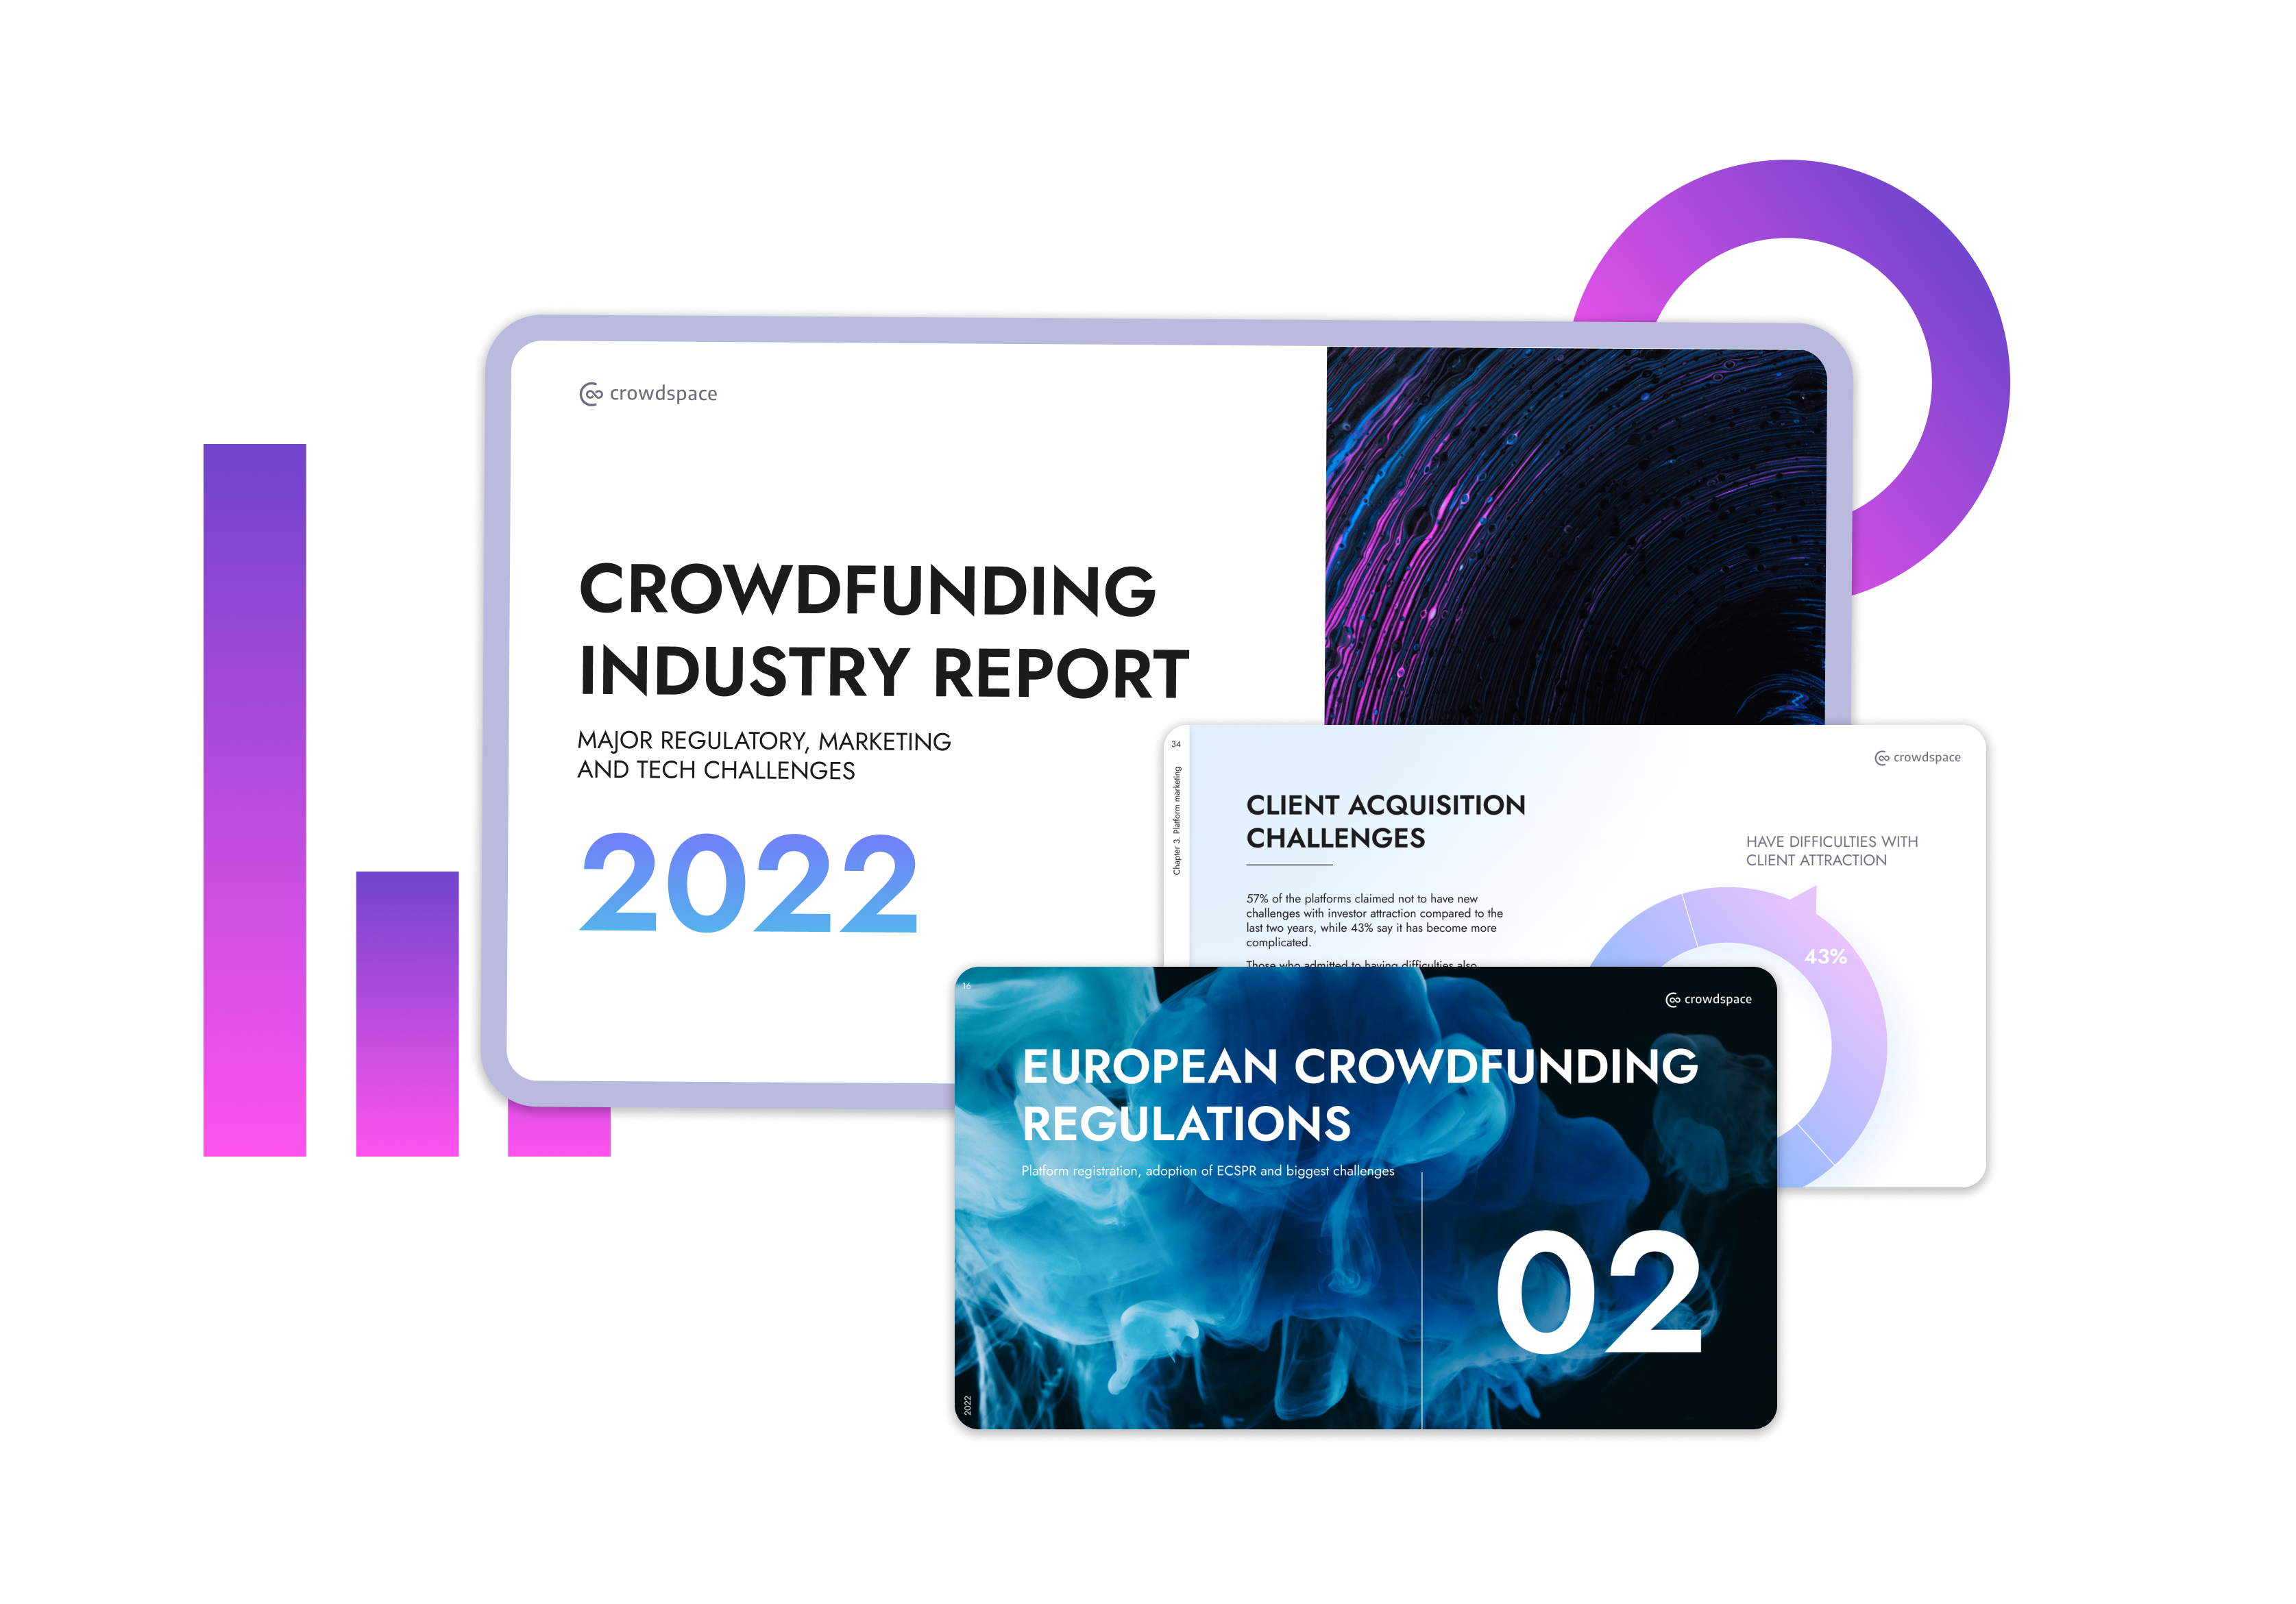 Frame-2089-2 Crowdfunding industry report 2022